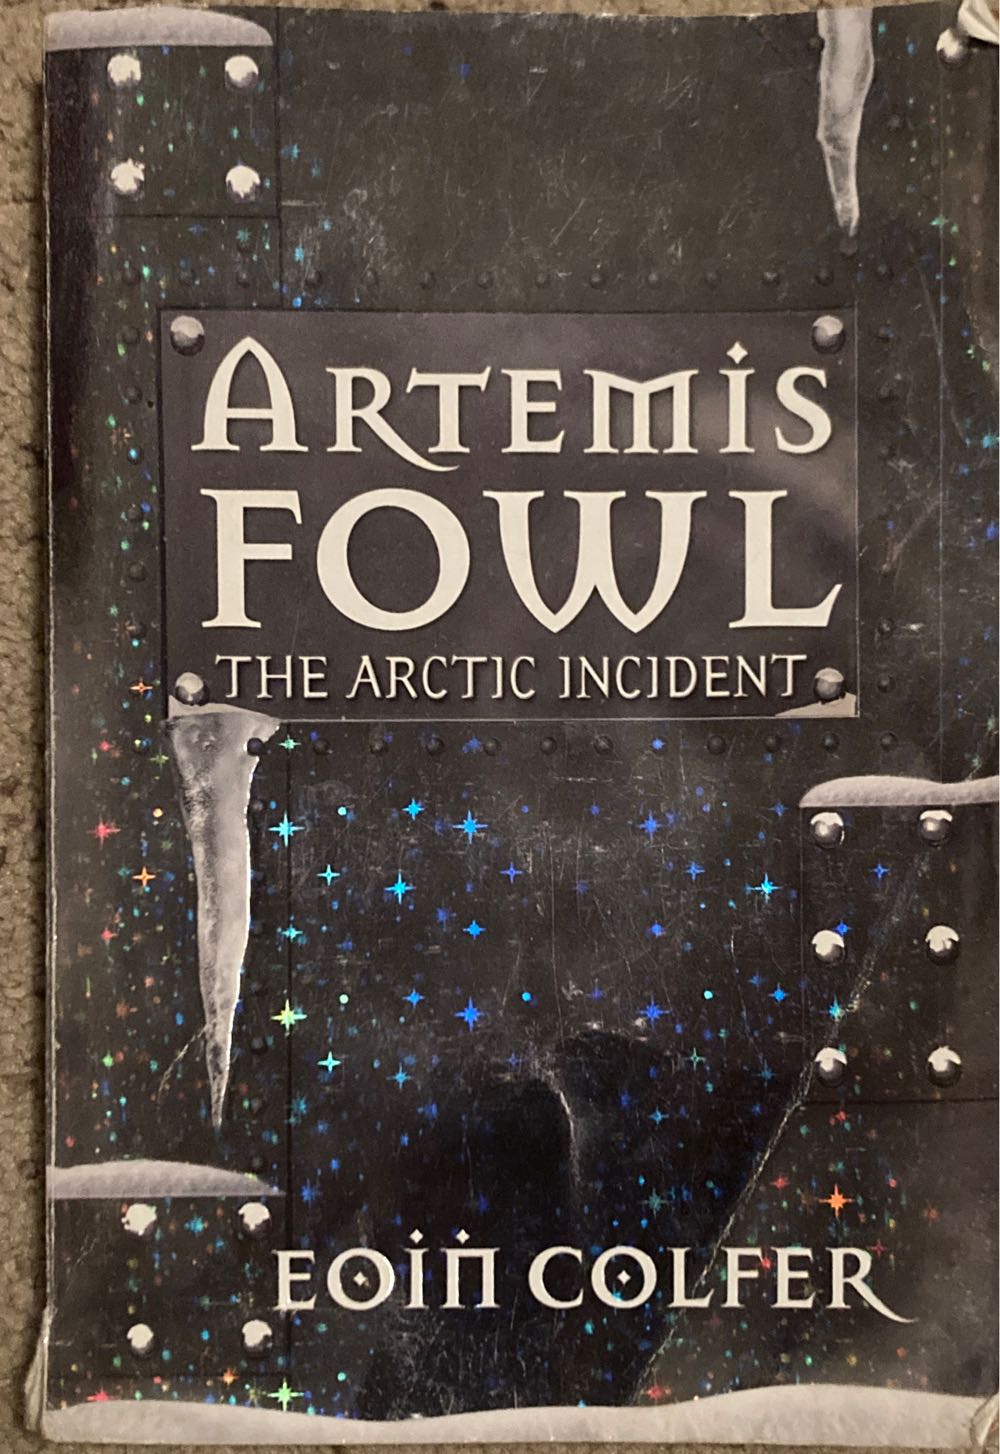 Artemis Fowl 2: The Arctic Incident - Eoin Colfer (Scholastic Inc. - Paperback) book collectible [Barcode 9780439450706] - Main Image 2